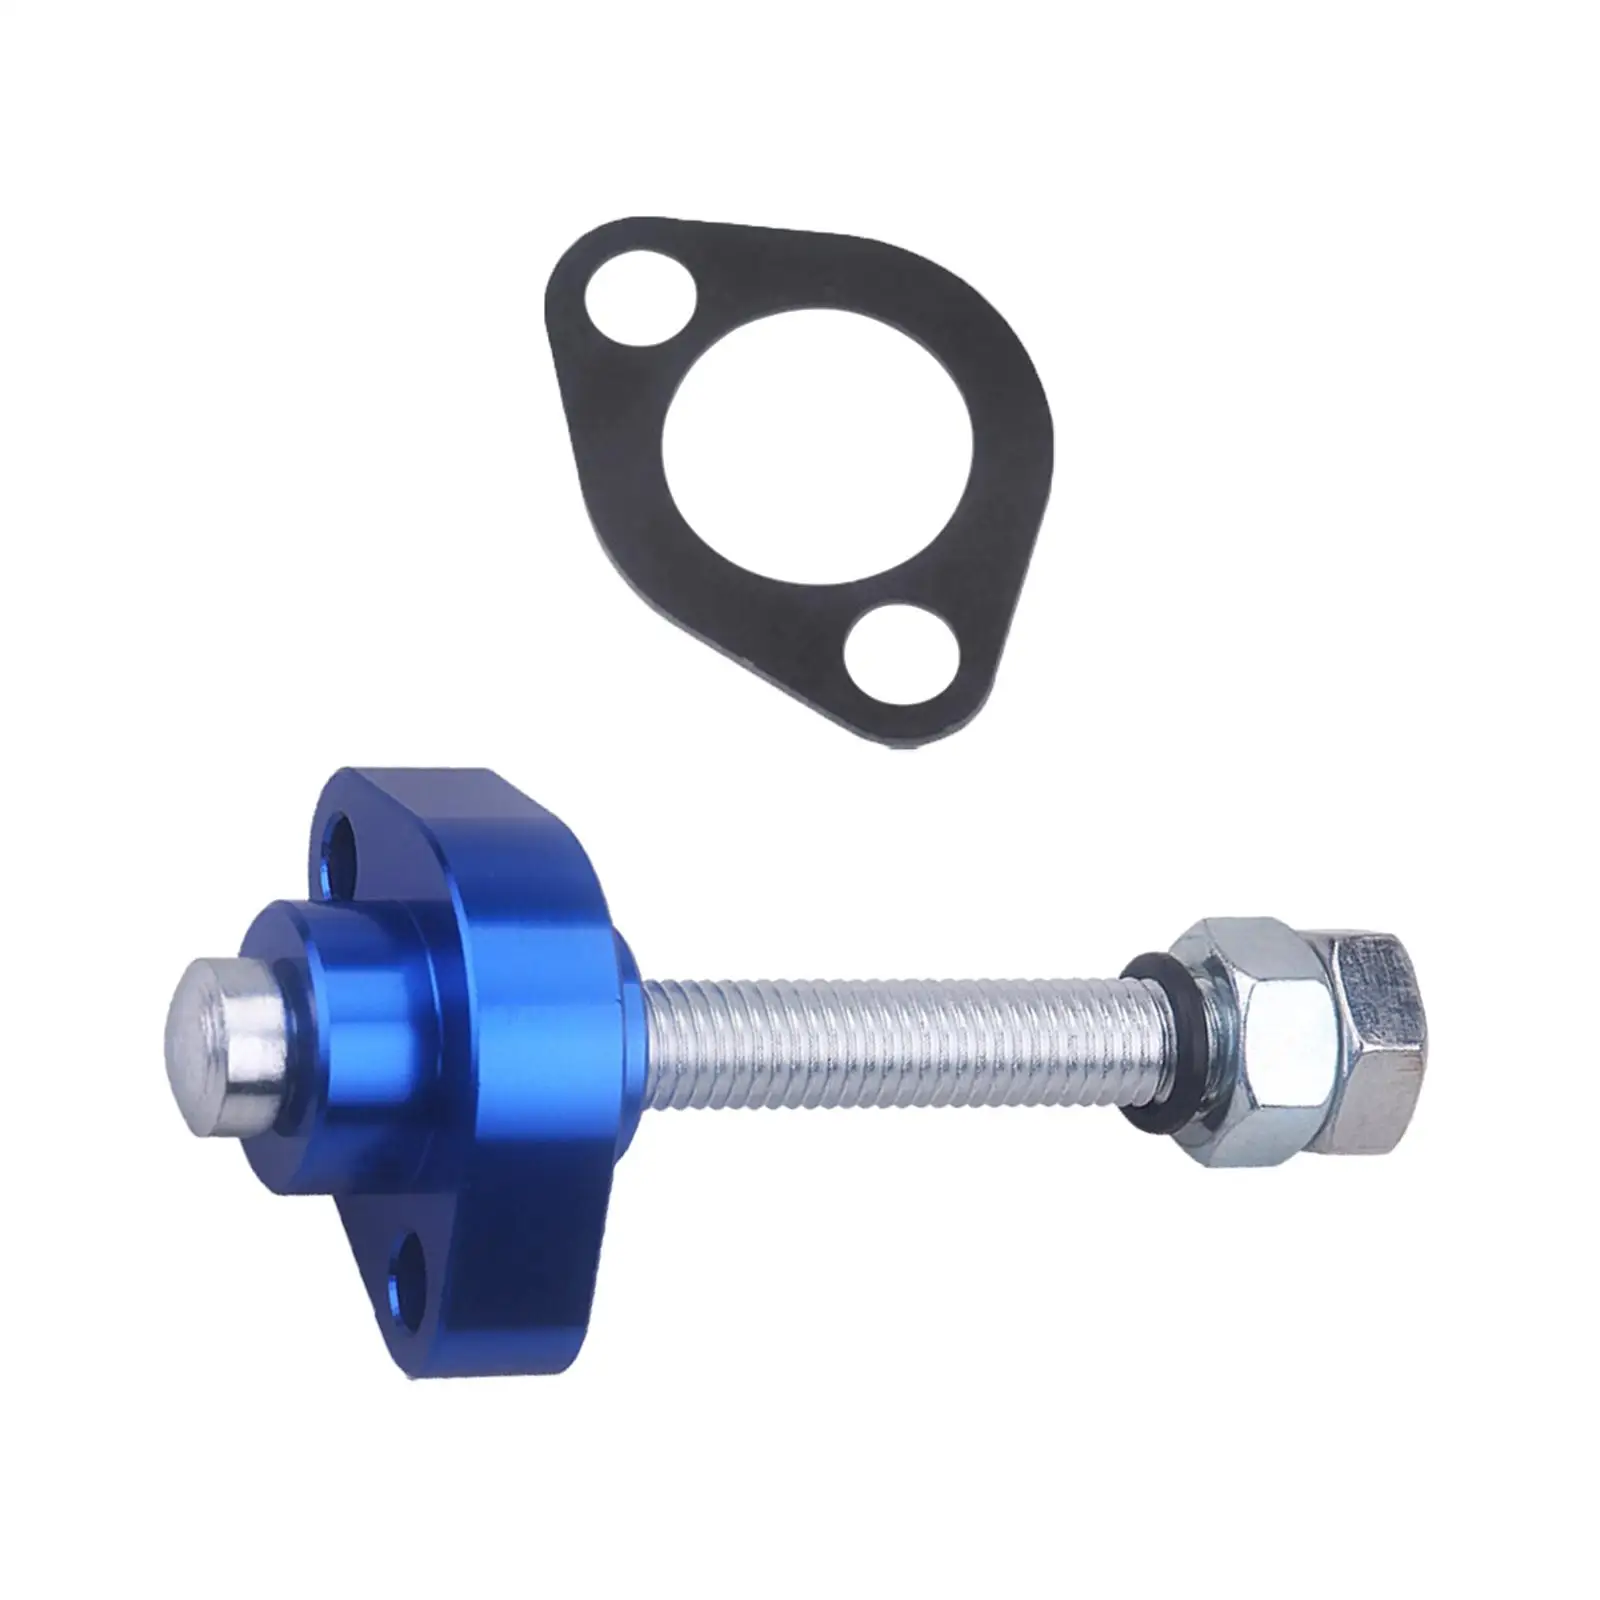 Timing Chain Tensioner Timing Chain Camshaft Tensioner for F3 F4 CBR900 Rr